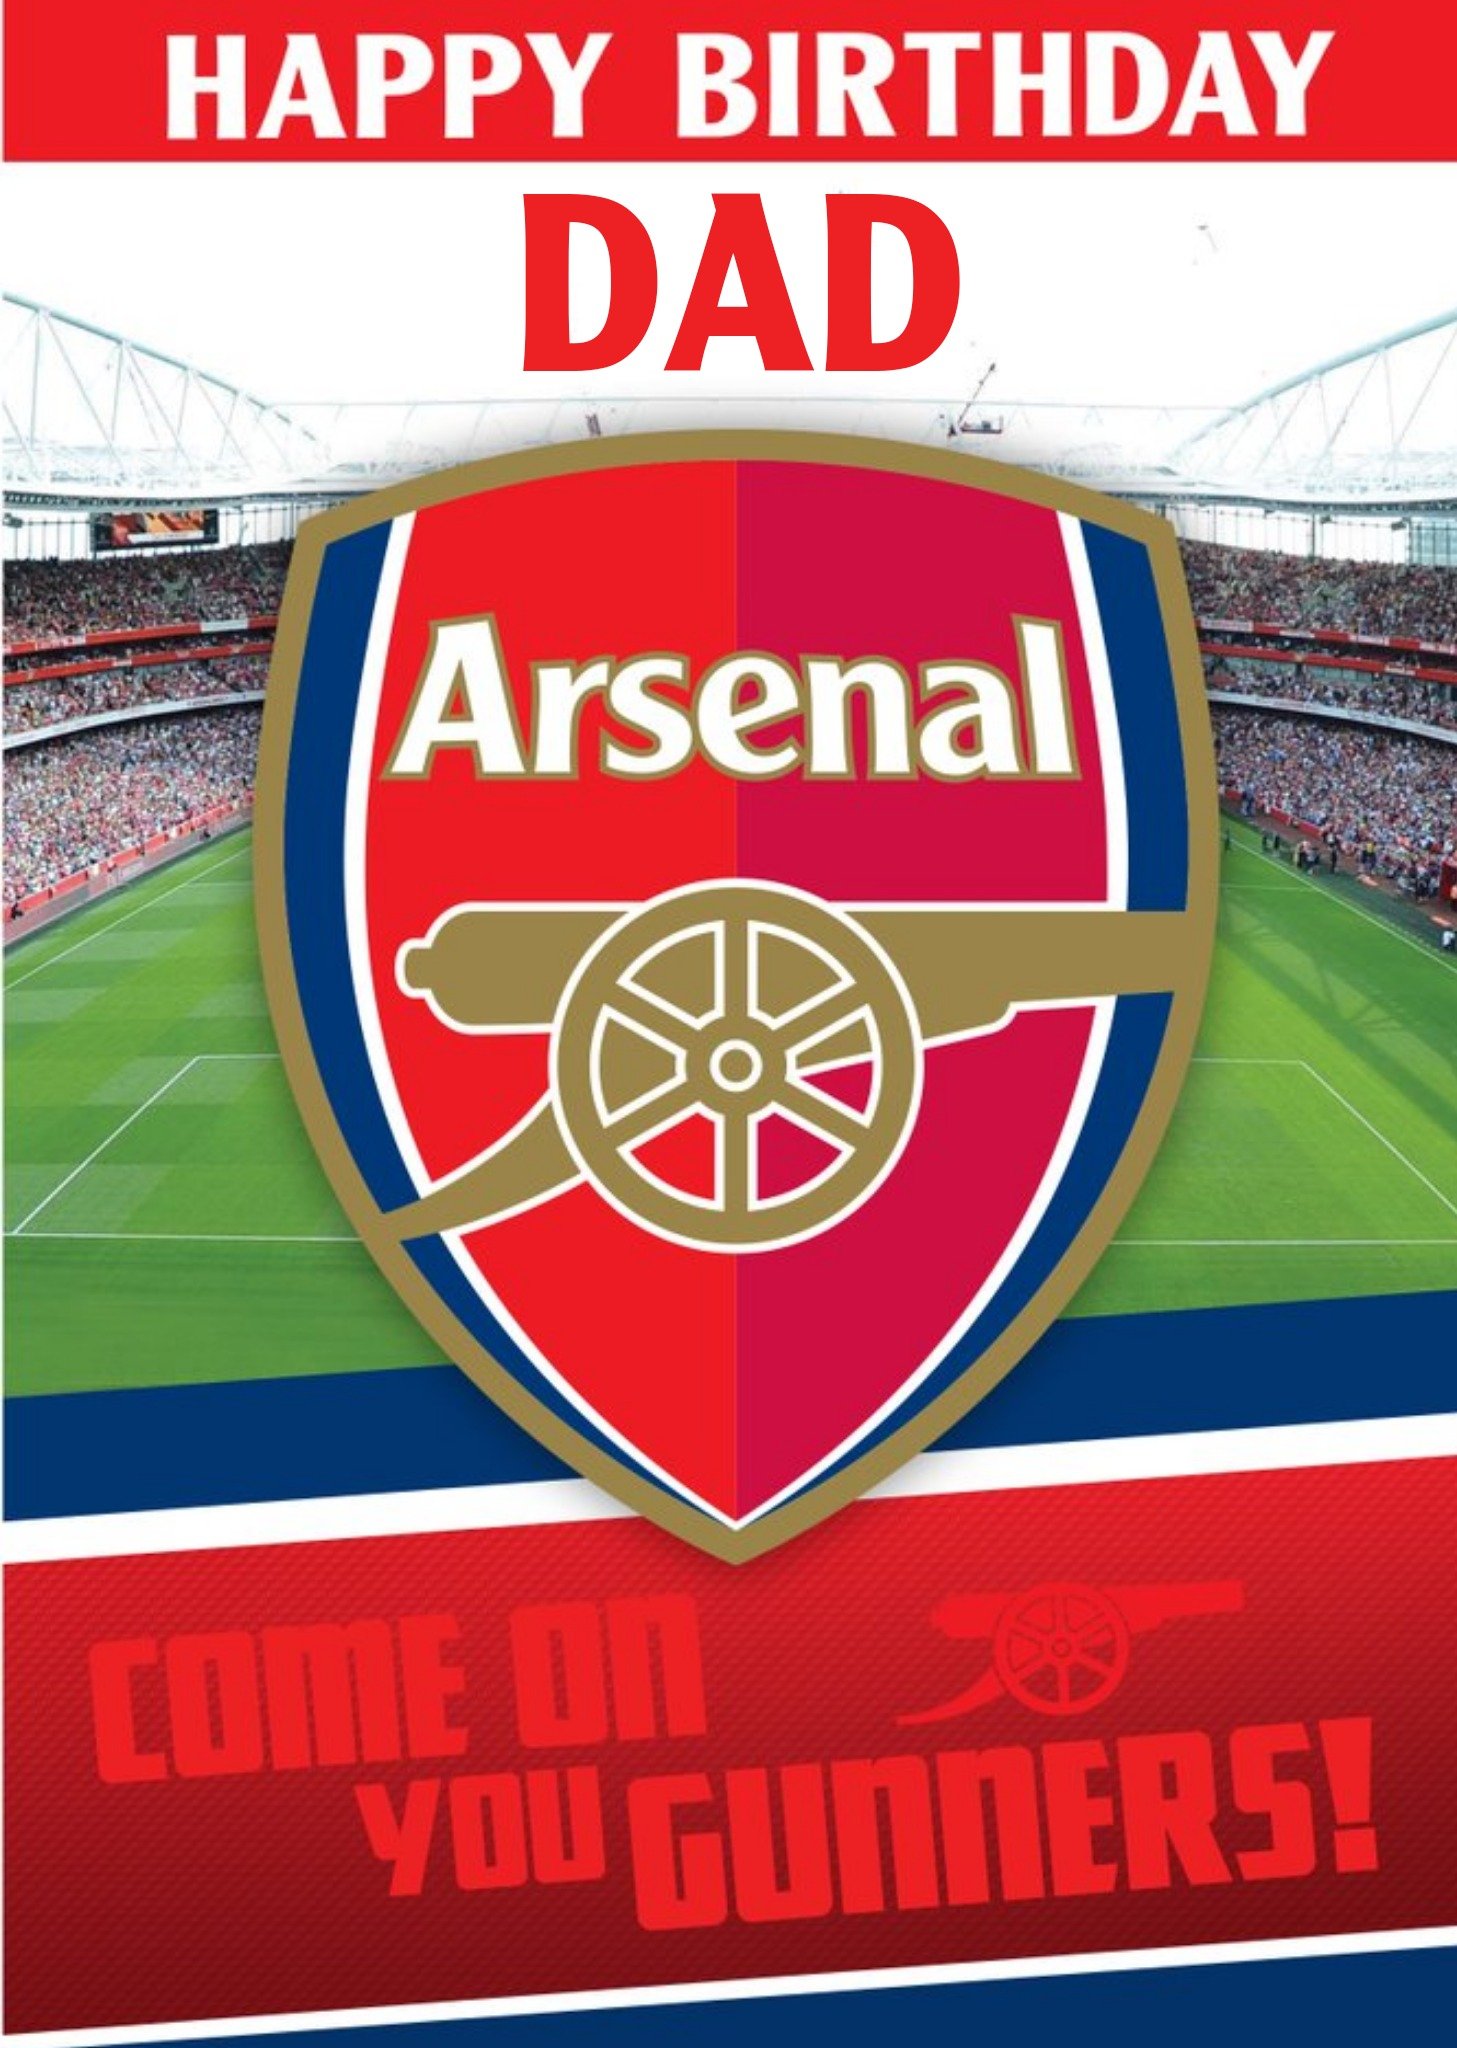 Arsenal Fc Birthday Card - Dad - Come On You Gunners, Large